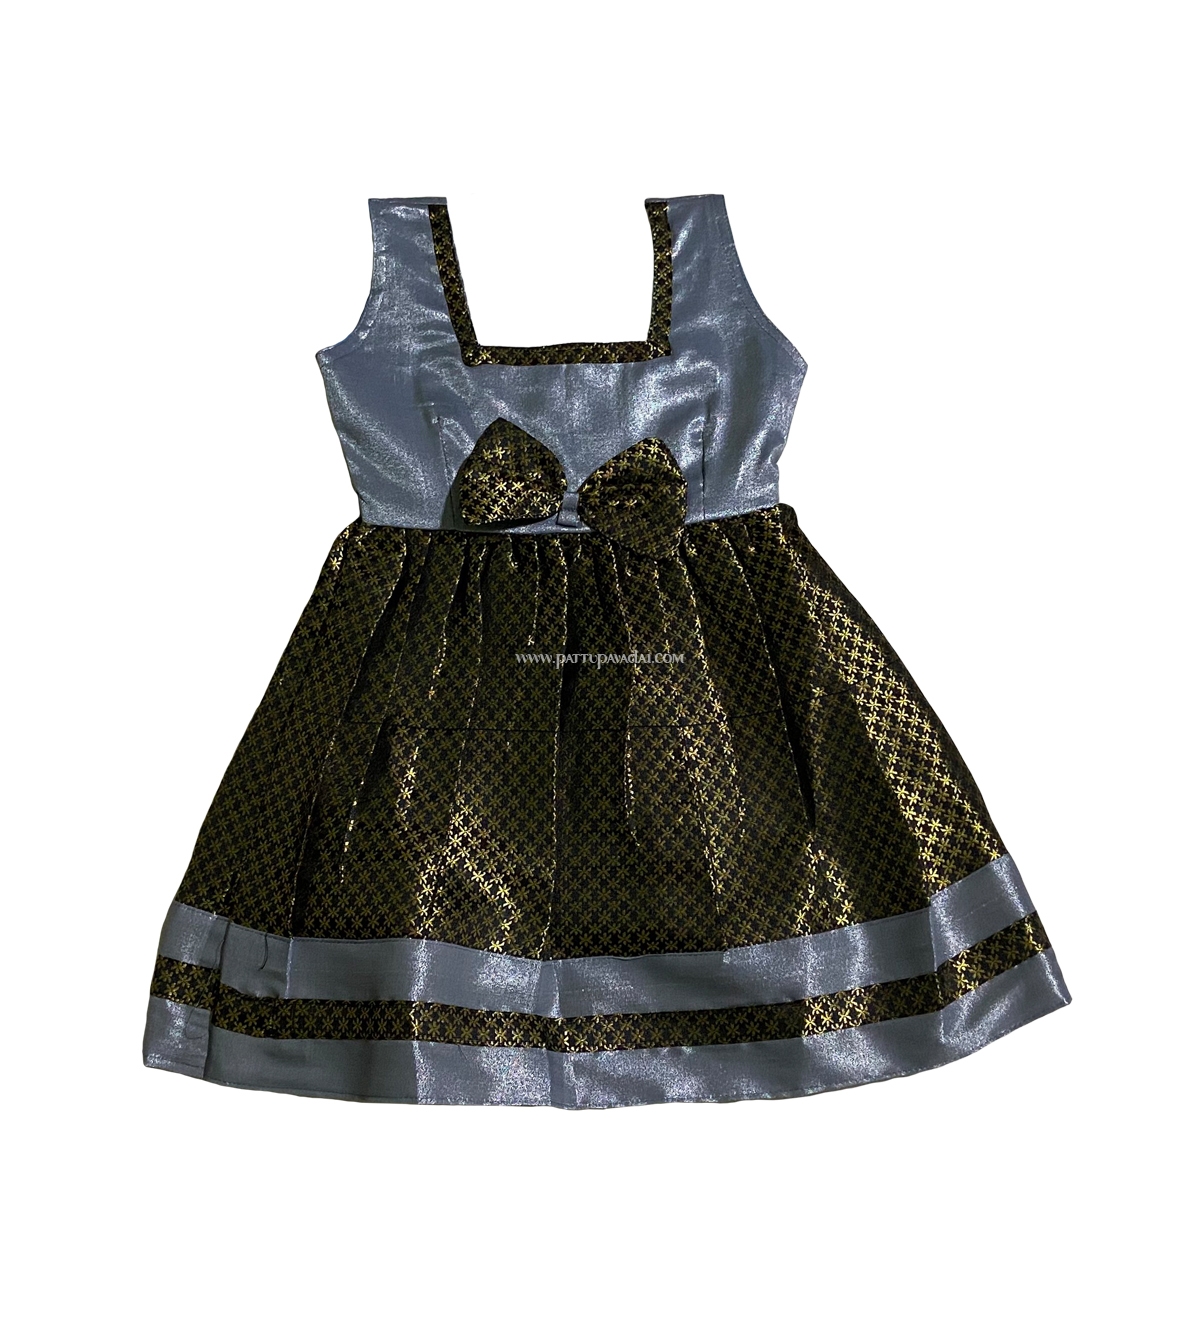 Grey and Black Tissue Frock